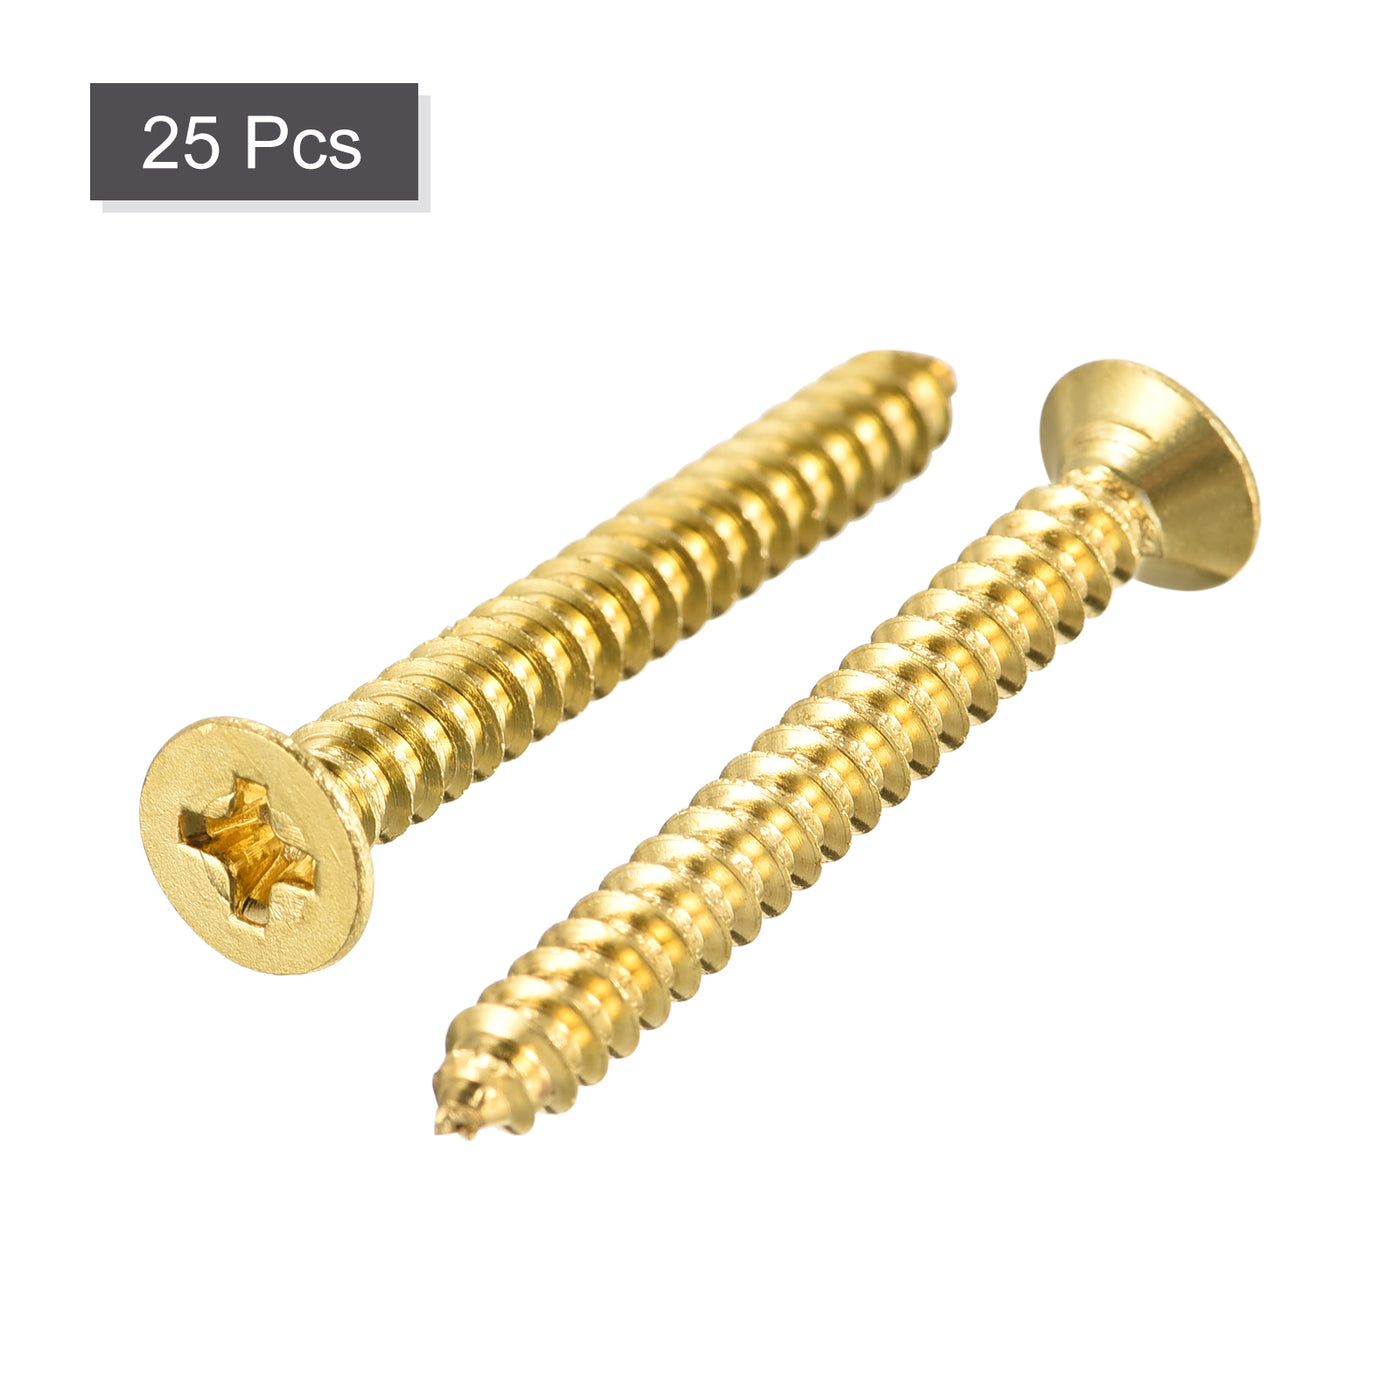 uxcell Uxcell Brass Wood Screws, M4x35mm Phillips Flat Head Self Tapping Connector for Door, Cabinet, Wooden Furniture 25Pcs